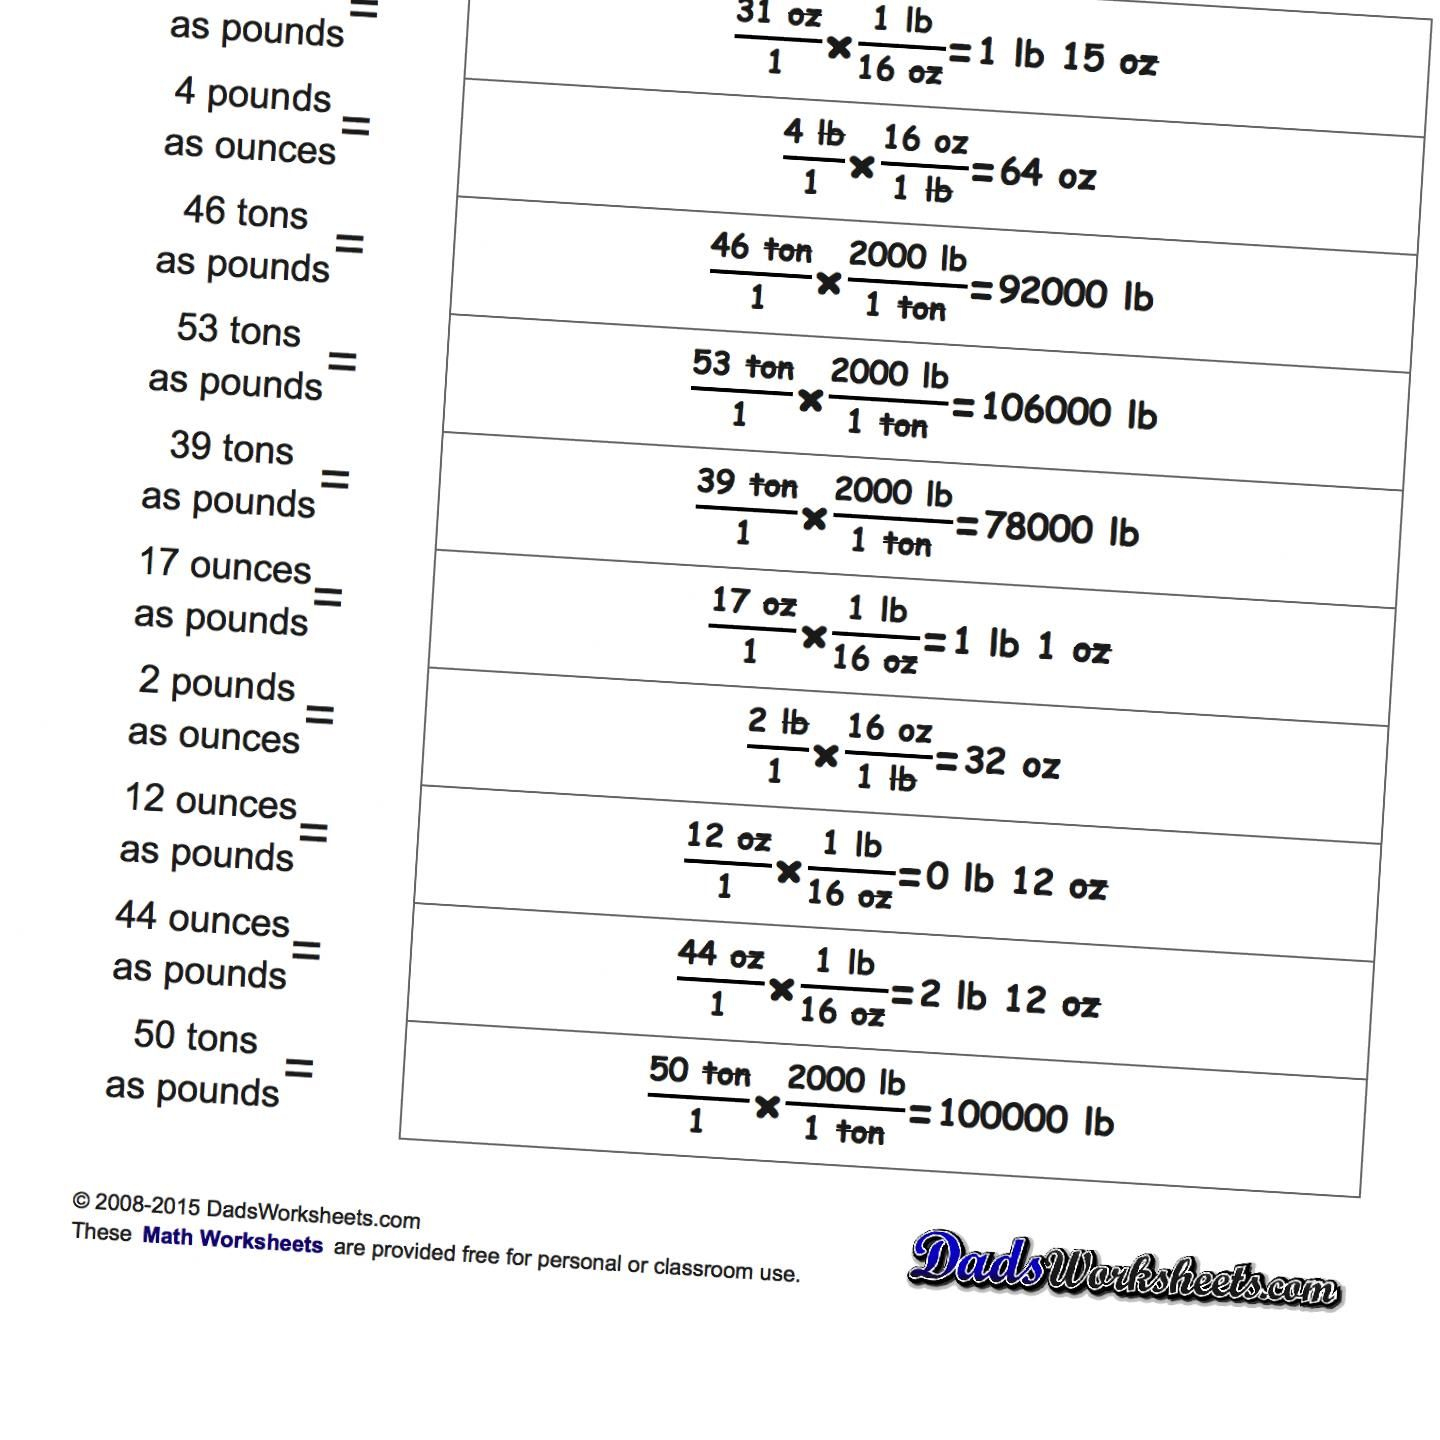 Mass Unit Conversion Worksheets Great For Math And Physics - Free Printable Physics Worksheets